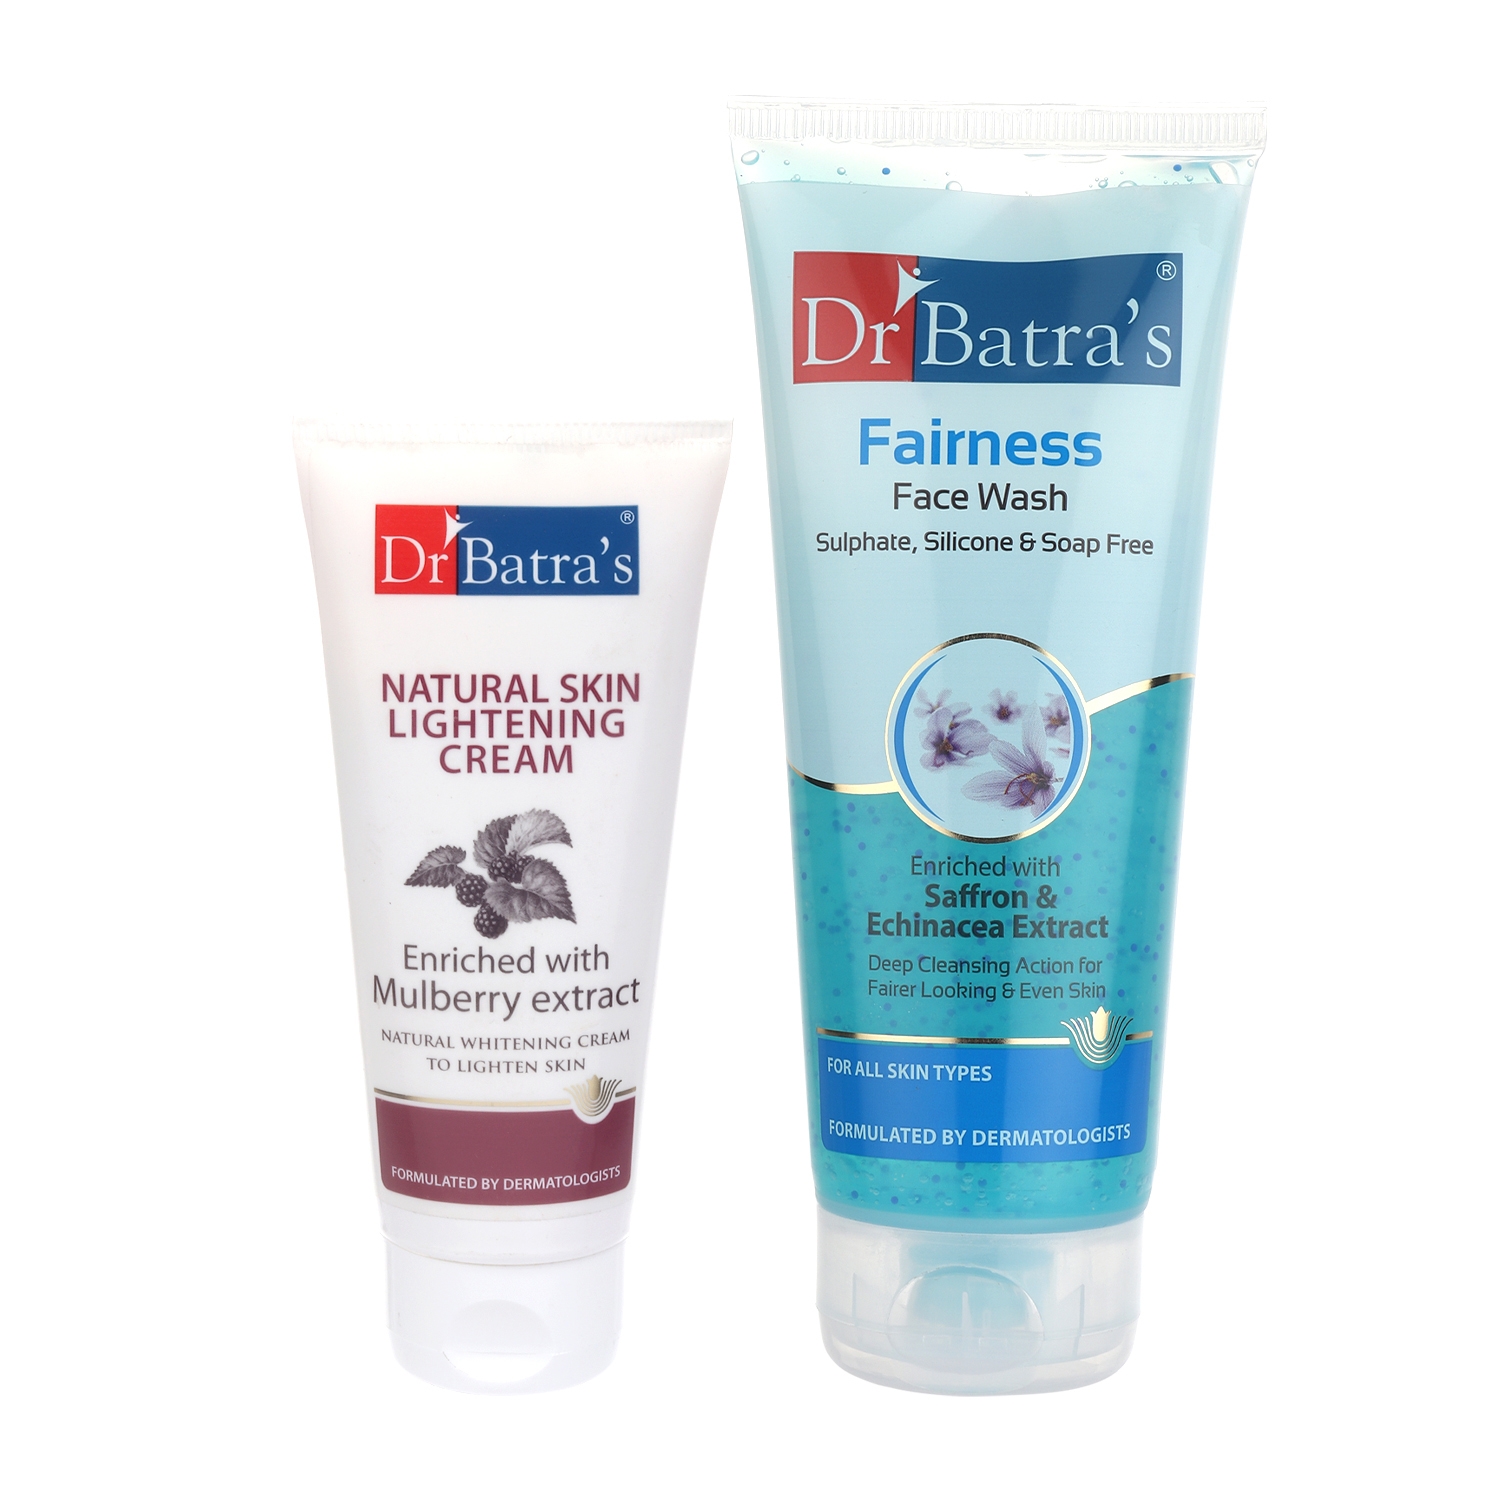 Dr Batra's | Dr Batra's Natural Skin Lightening Cream - 100 gm And Fairness Face Wash 200 gm (Pack of 2 Men and Women)